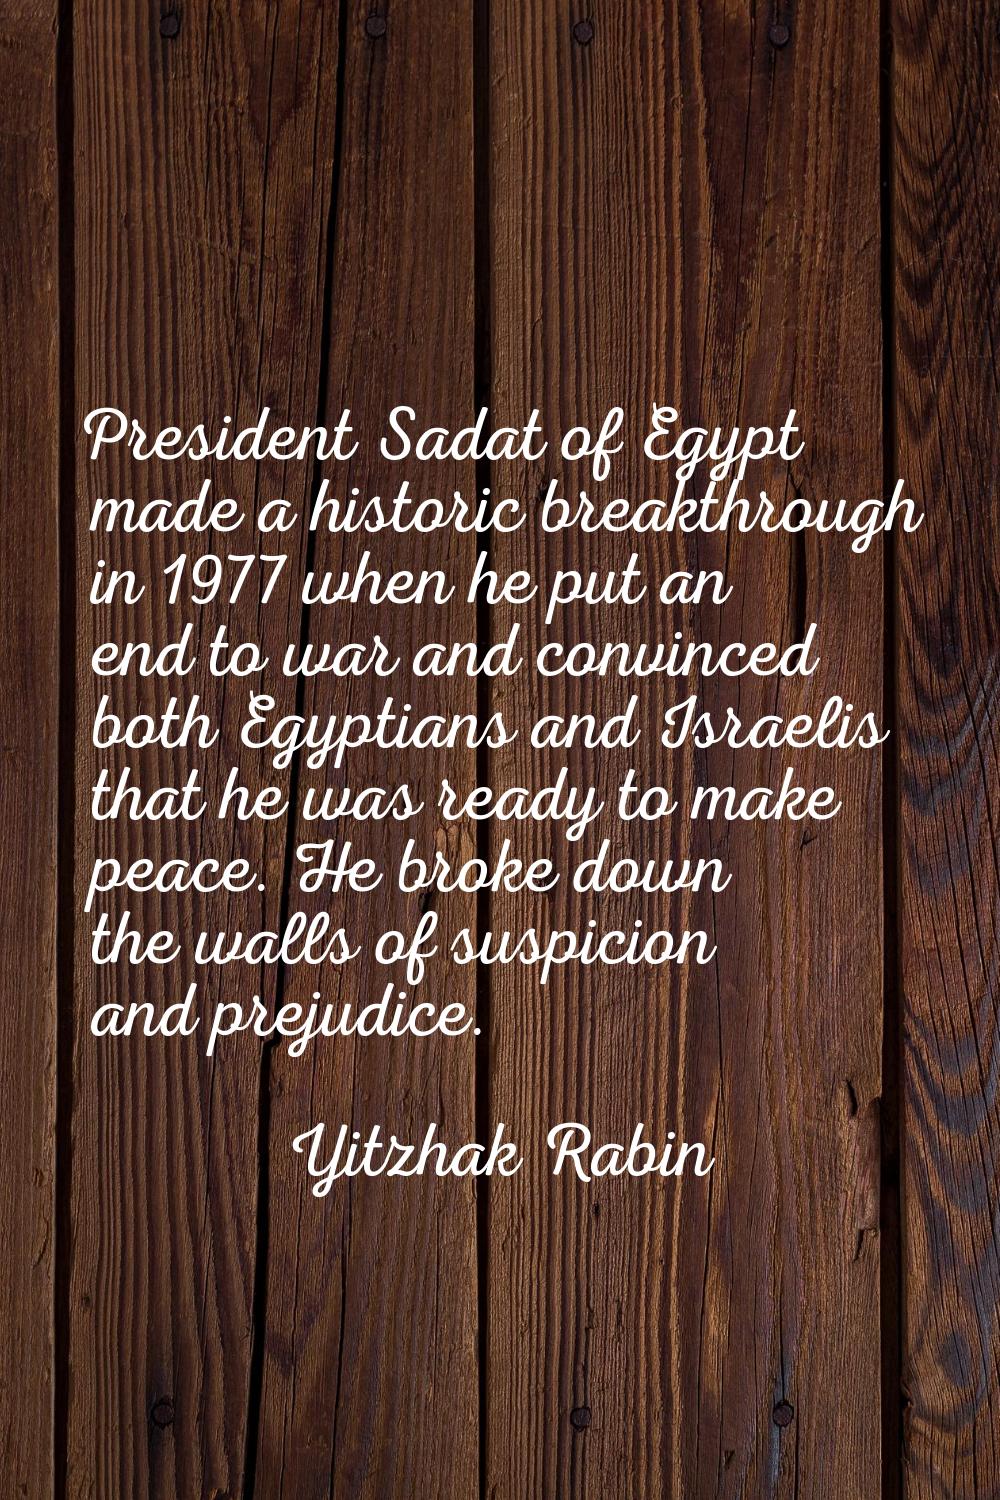 President Sadat of Egypt made a historic breakthrough in 1977 when he put an end to war and convinc